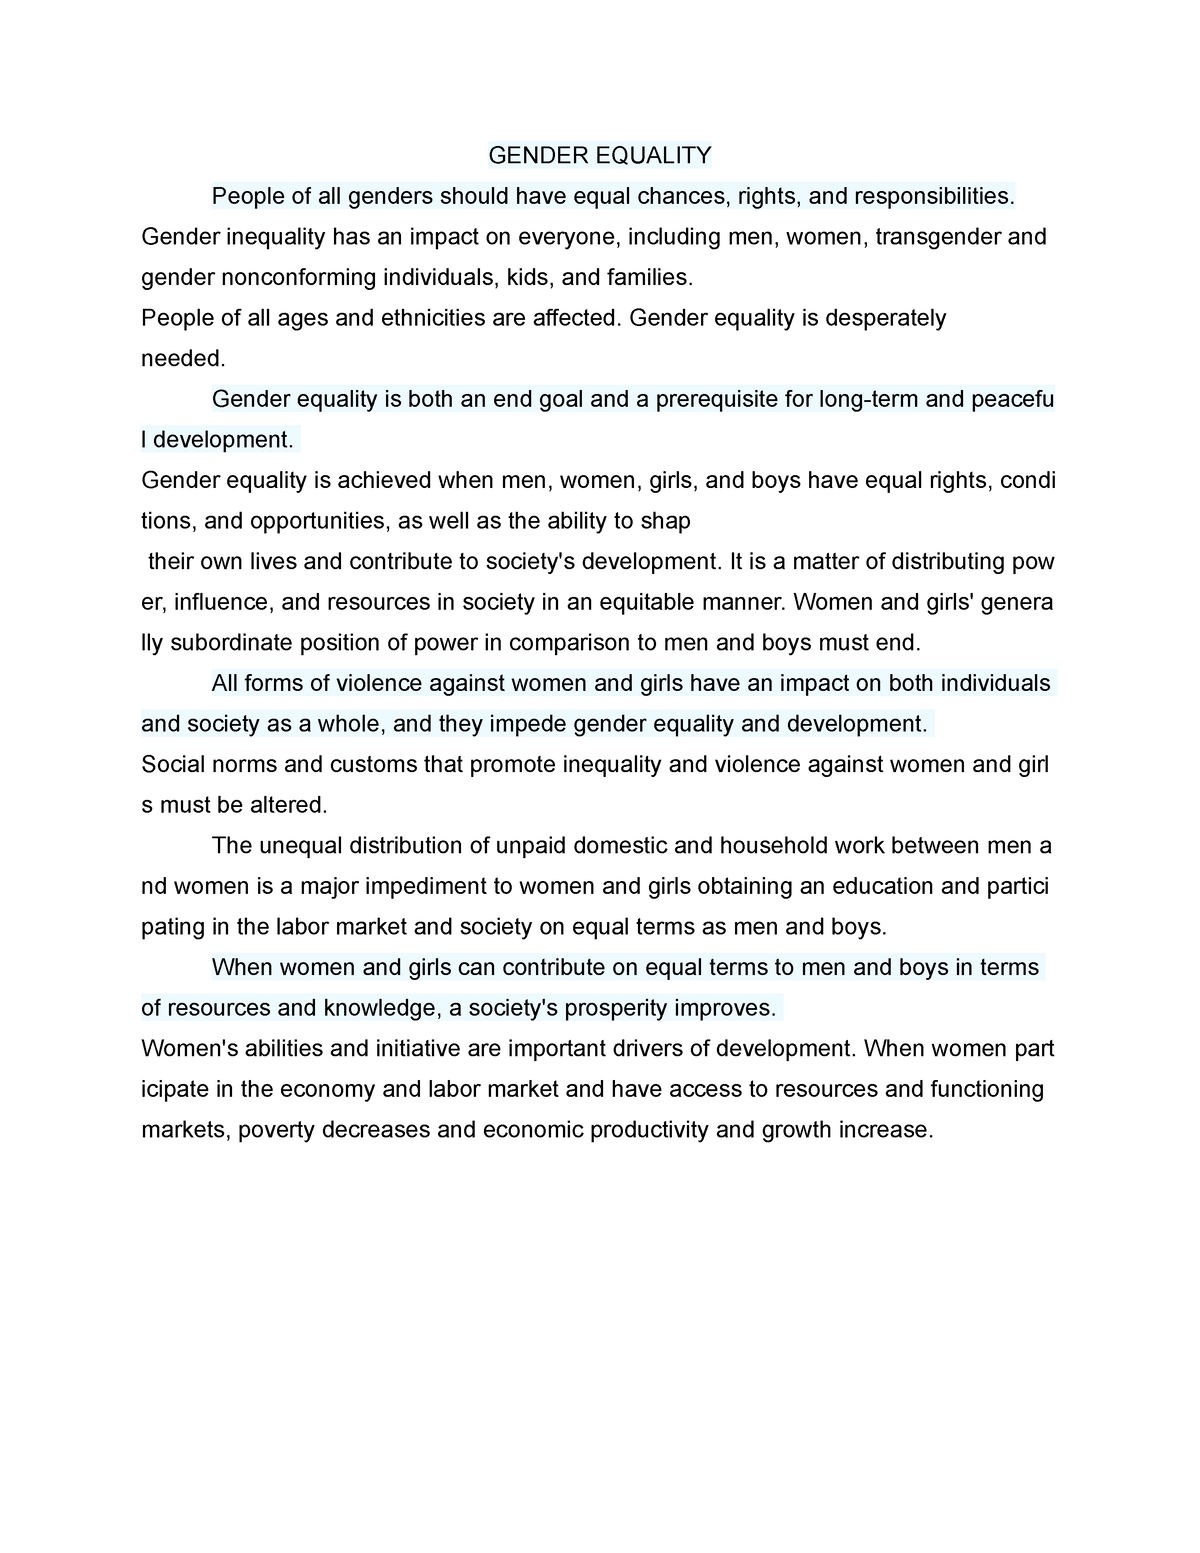 essay about gender equality with introduction body and conclusion